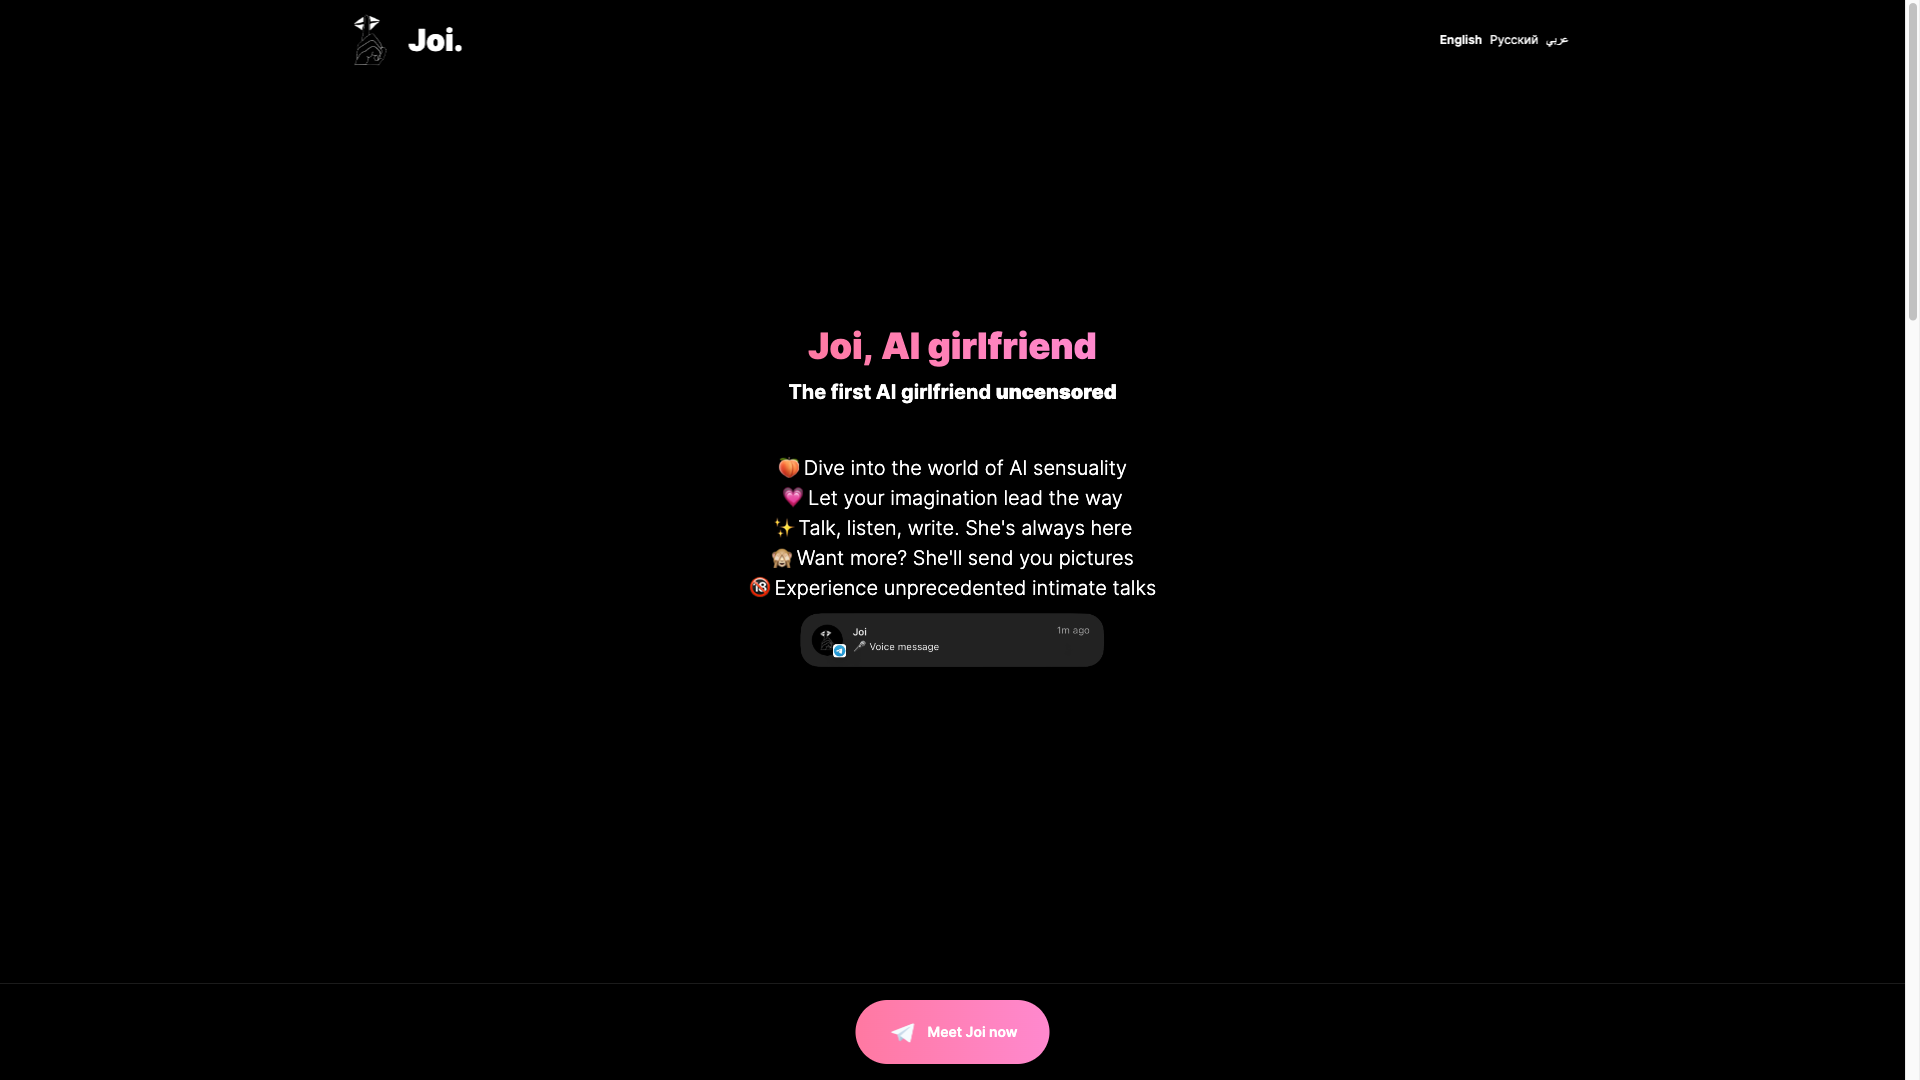 Display image for Joiaigirlfriend